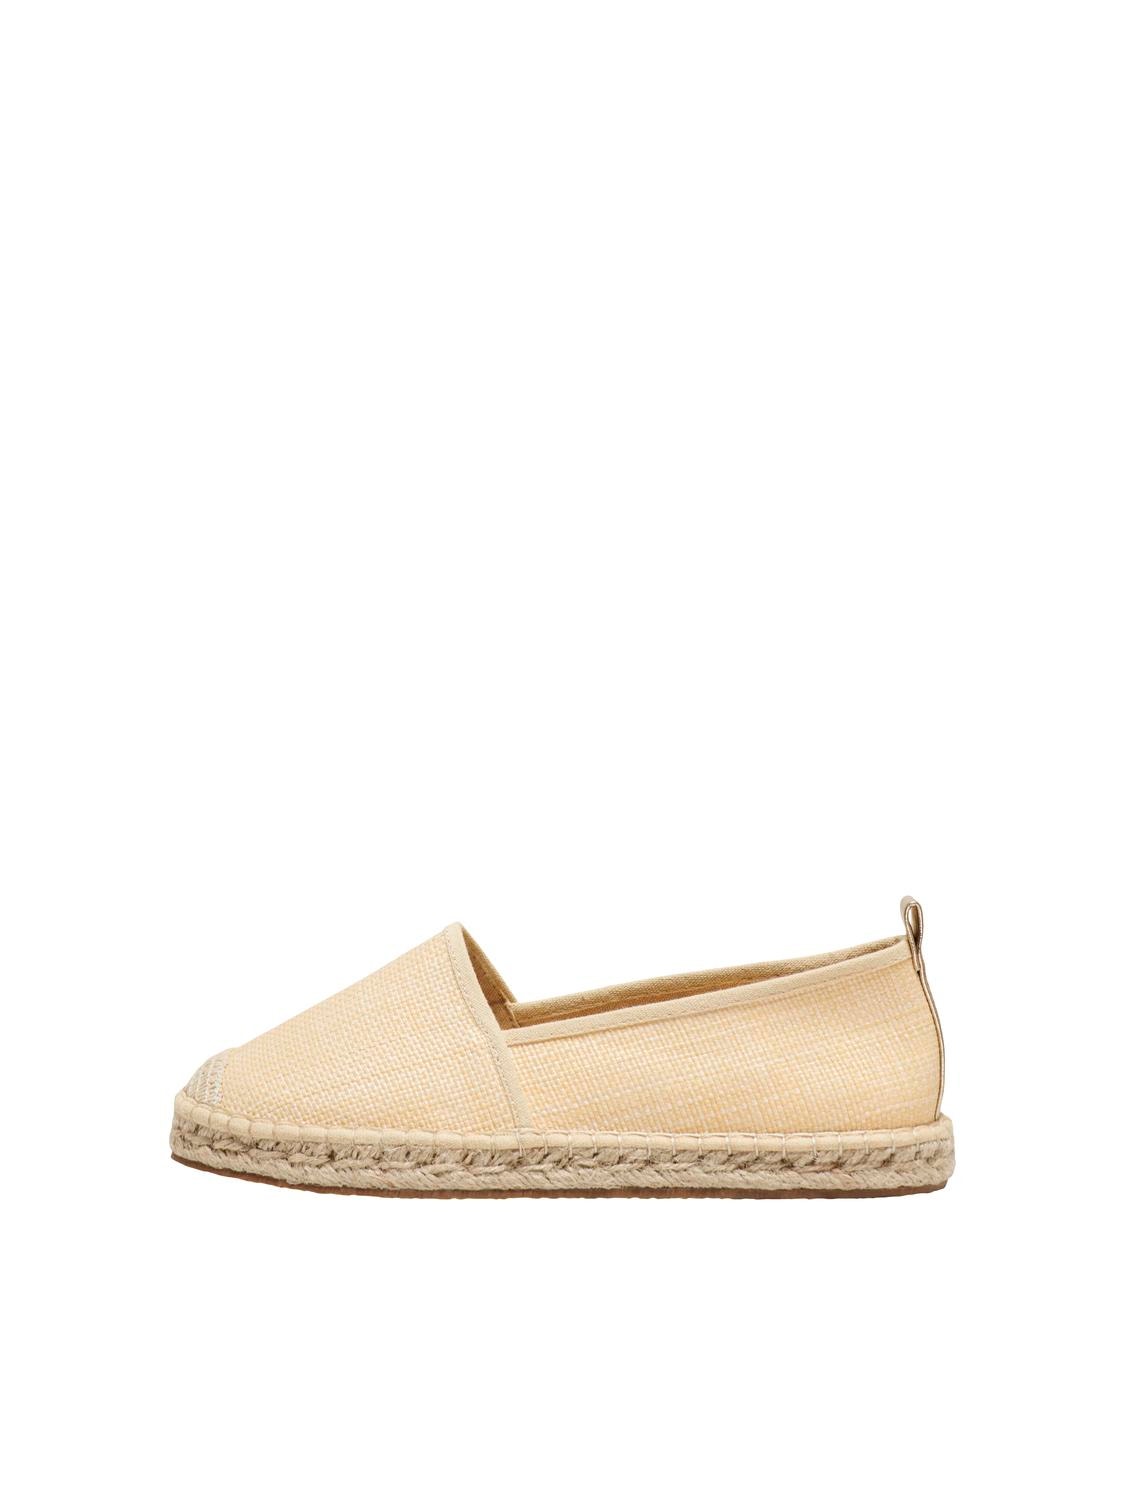 ONLY Round toe tip easpadrillos -Beige - 15320203